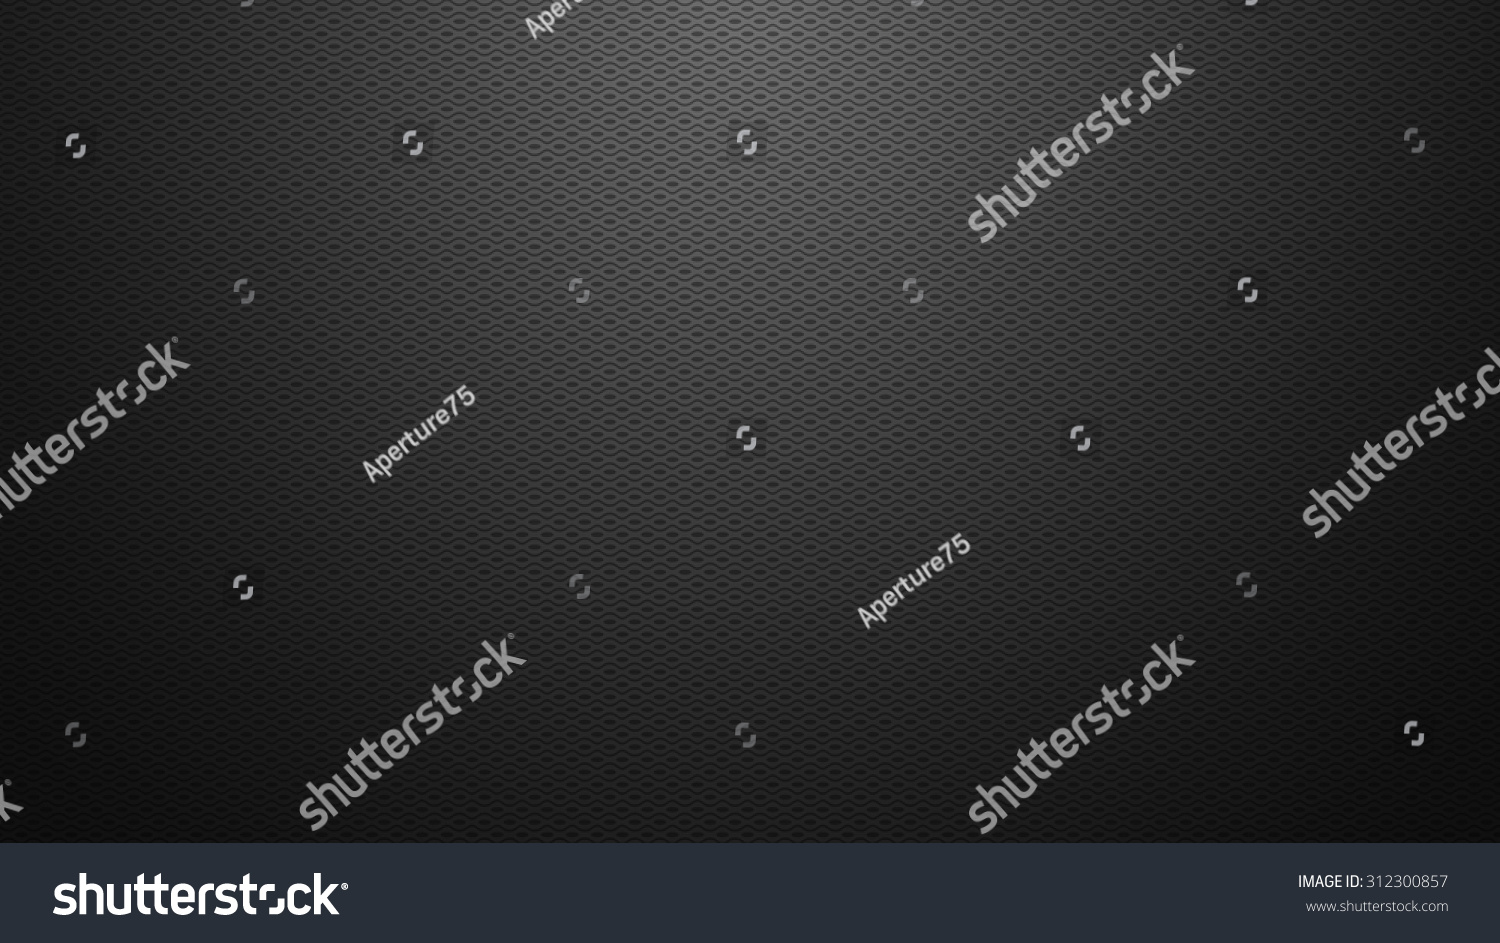 Black And White Grid Background. Stock Photo 312300857 : Shutterstock